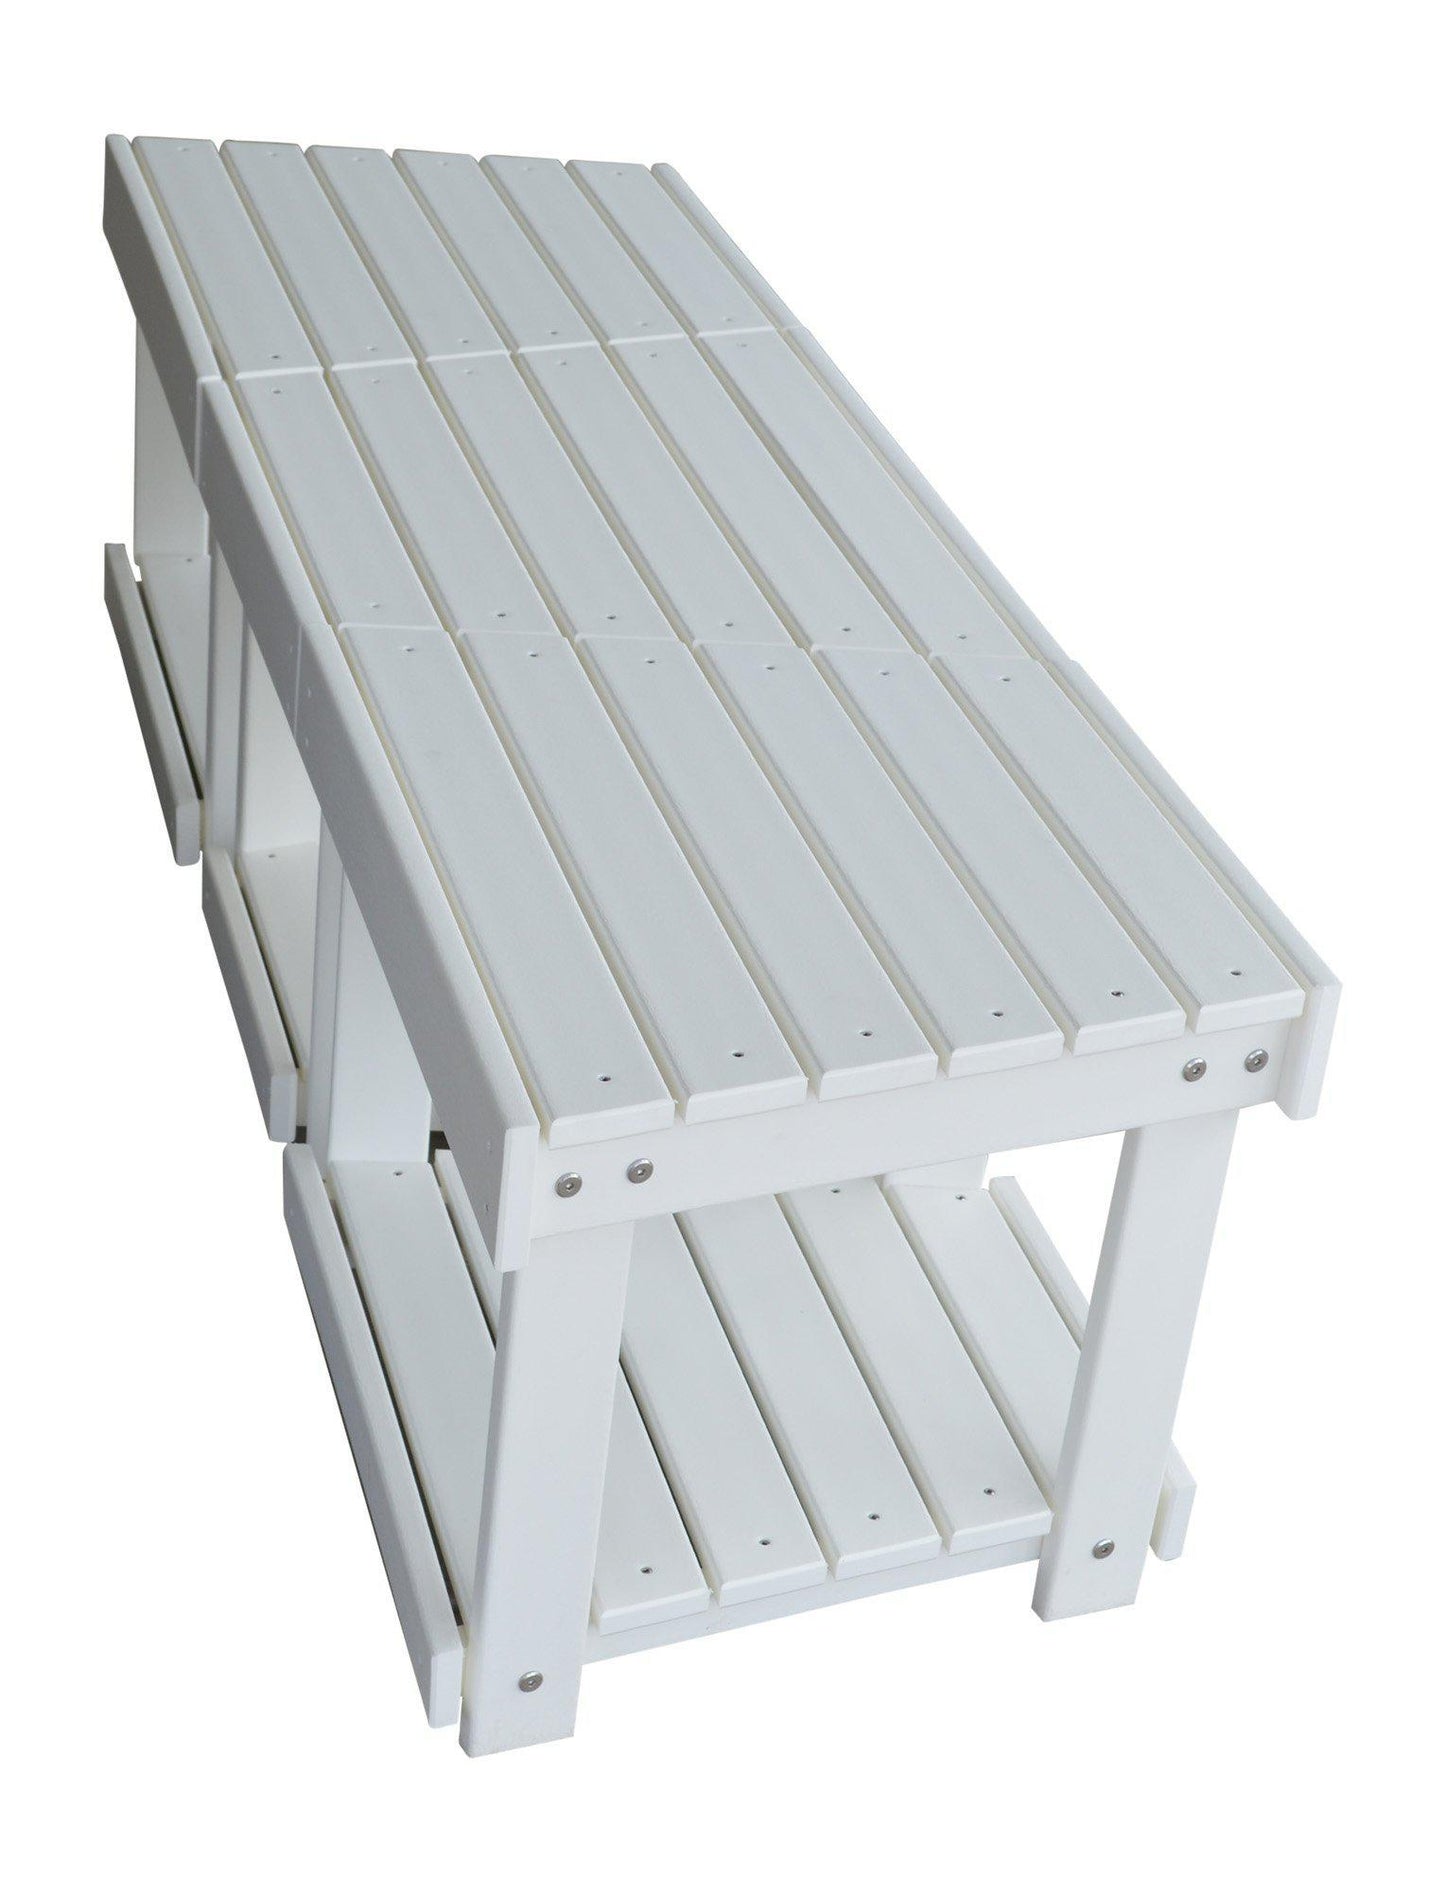 A&L Furniture Company Recycled Plastic Poly New Hope Modular Bench/Side Table - LEAD TIME TO SHIP 10 BUSINESS DAYS